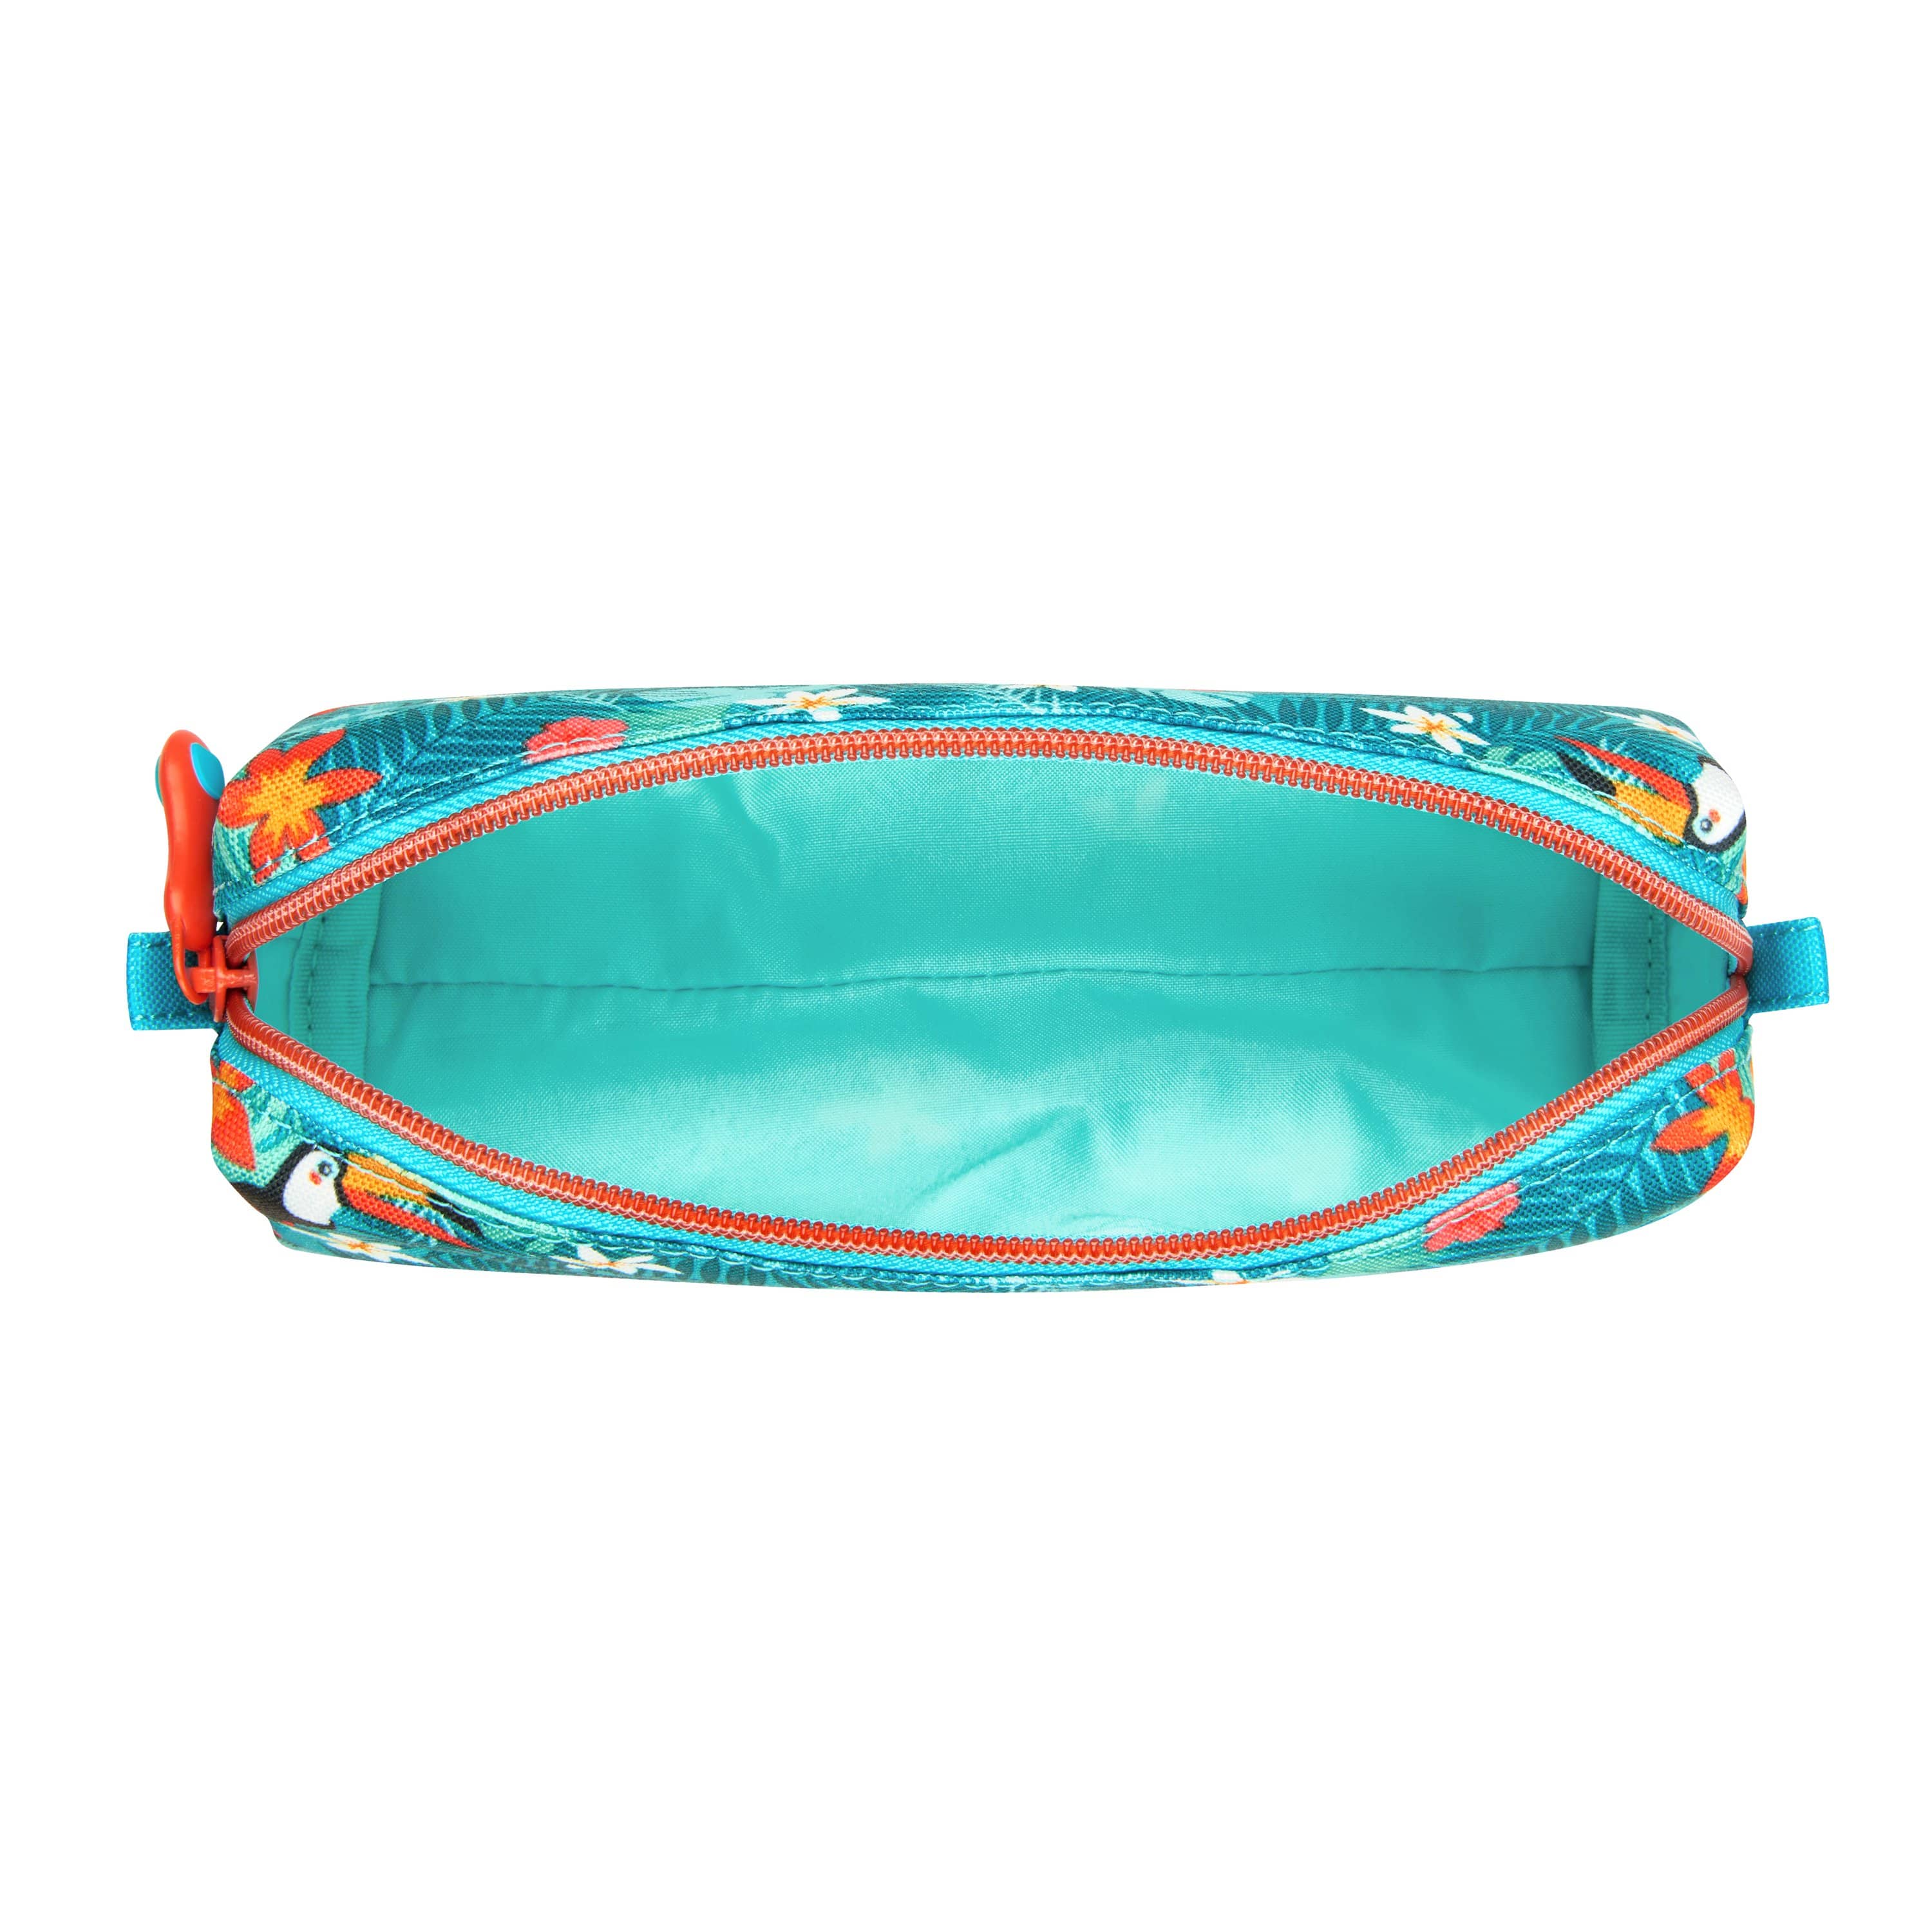 DELSEY SCHOOL 2018 PENCIL CASE TURQUOISE 00339317112 TURQUOISE